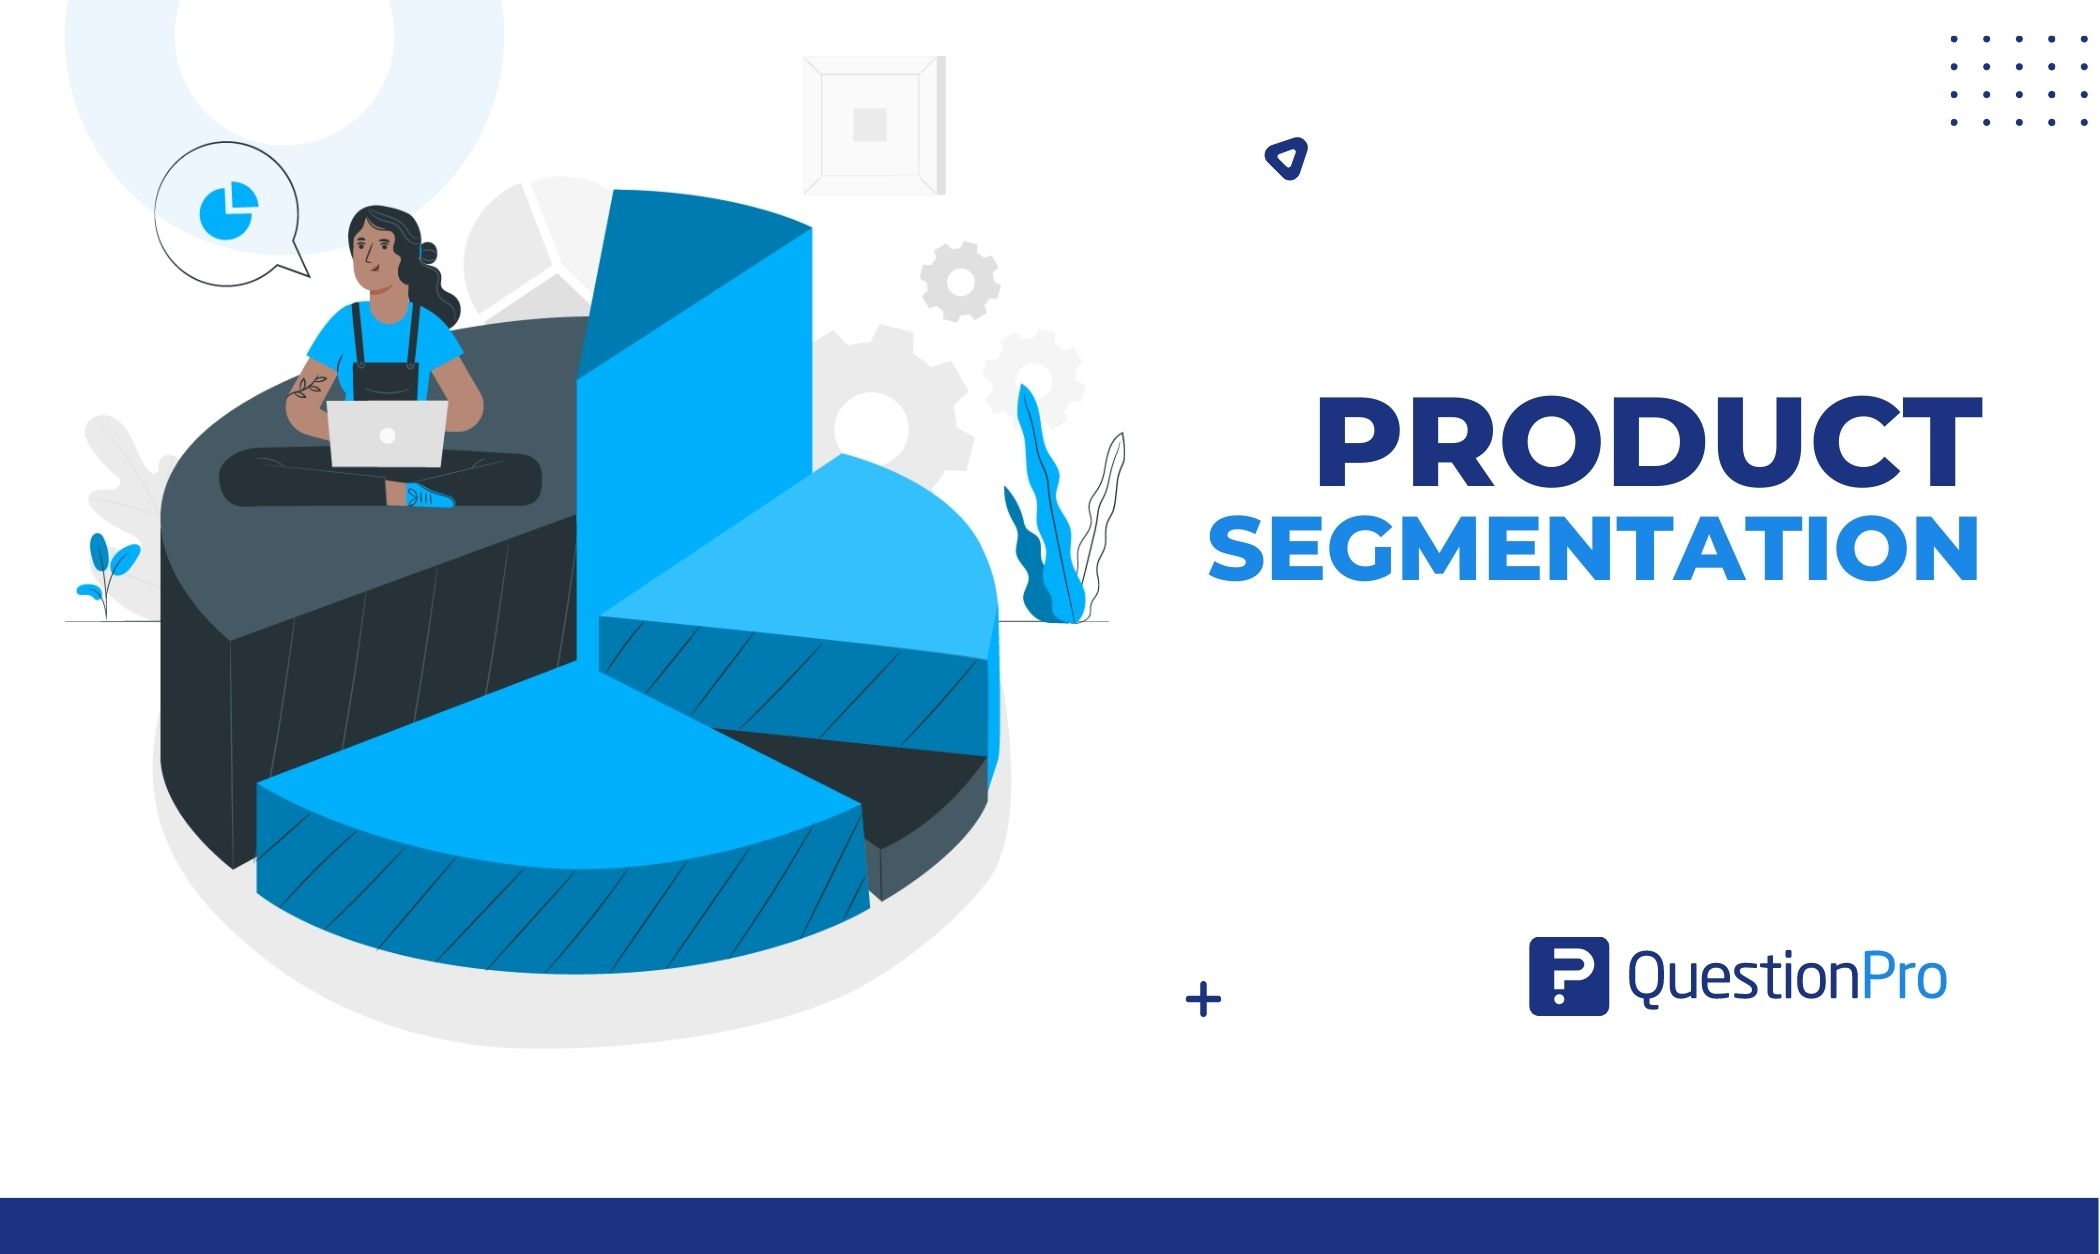 Product segmentation is to create a product with minimal changes and offer it to several customer groups. Learn how QuestionPro can help you.